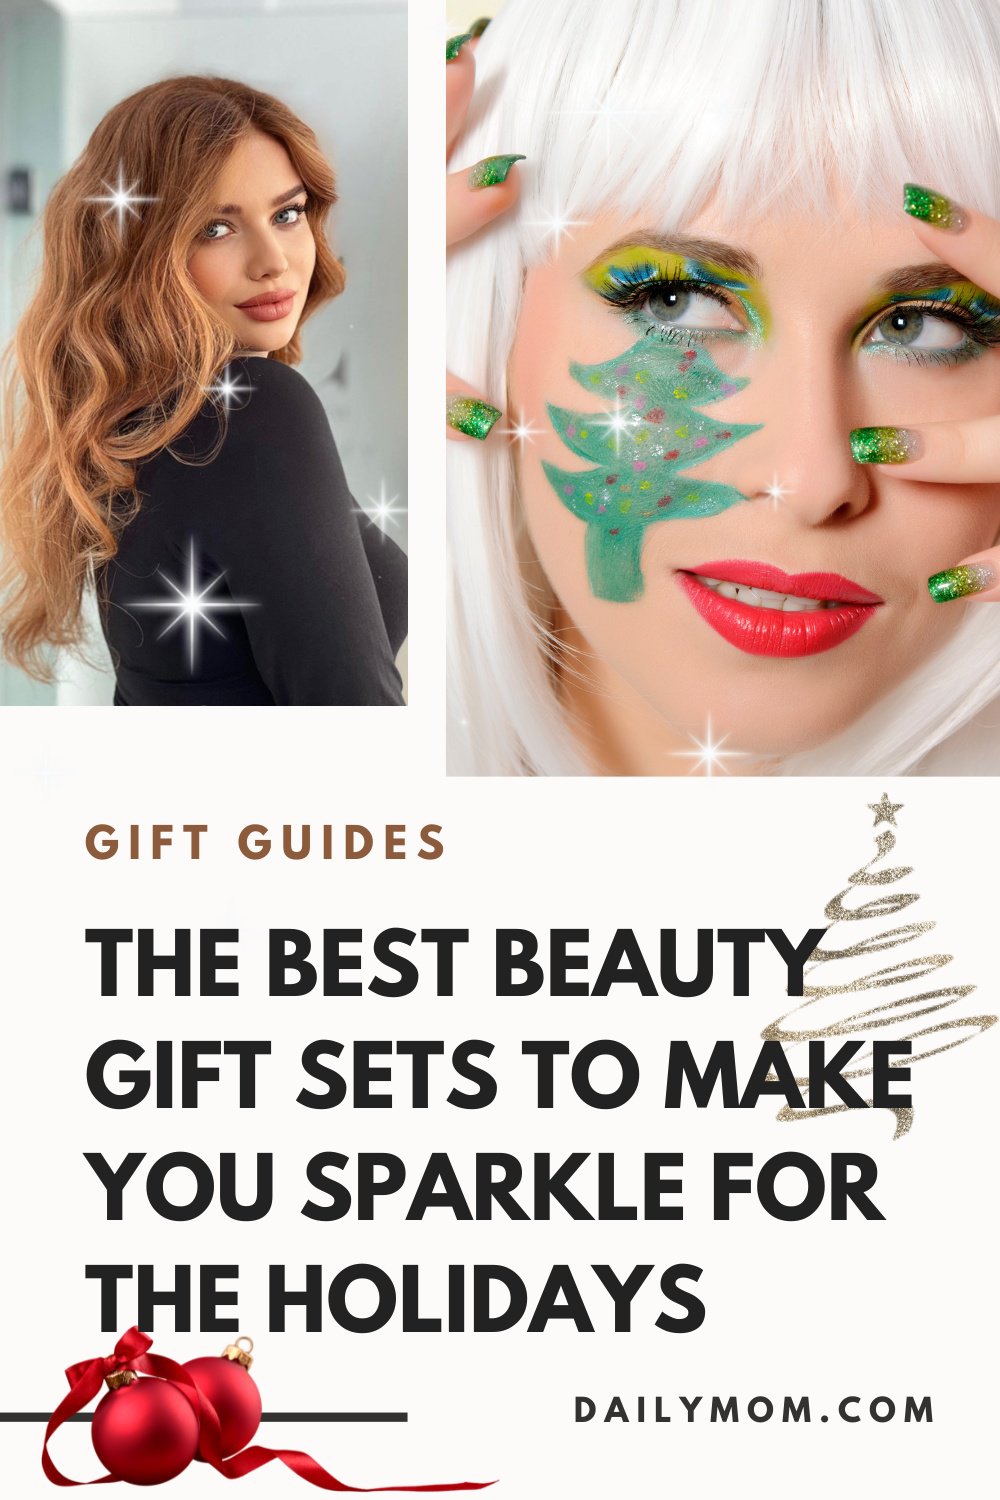 25 Of The Best Beauty Gift Sets To Make You Sparkle For The Holidays